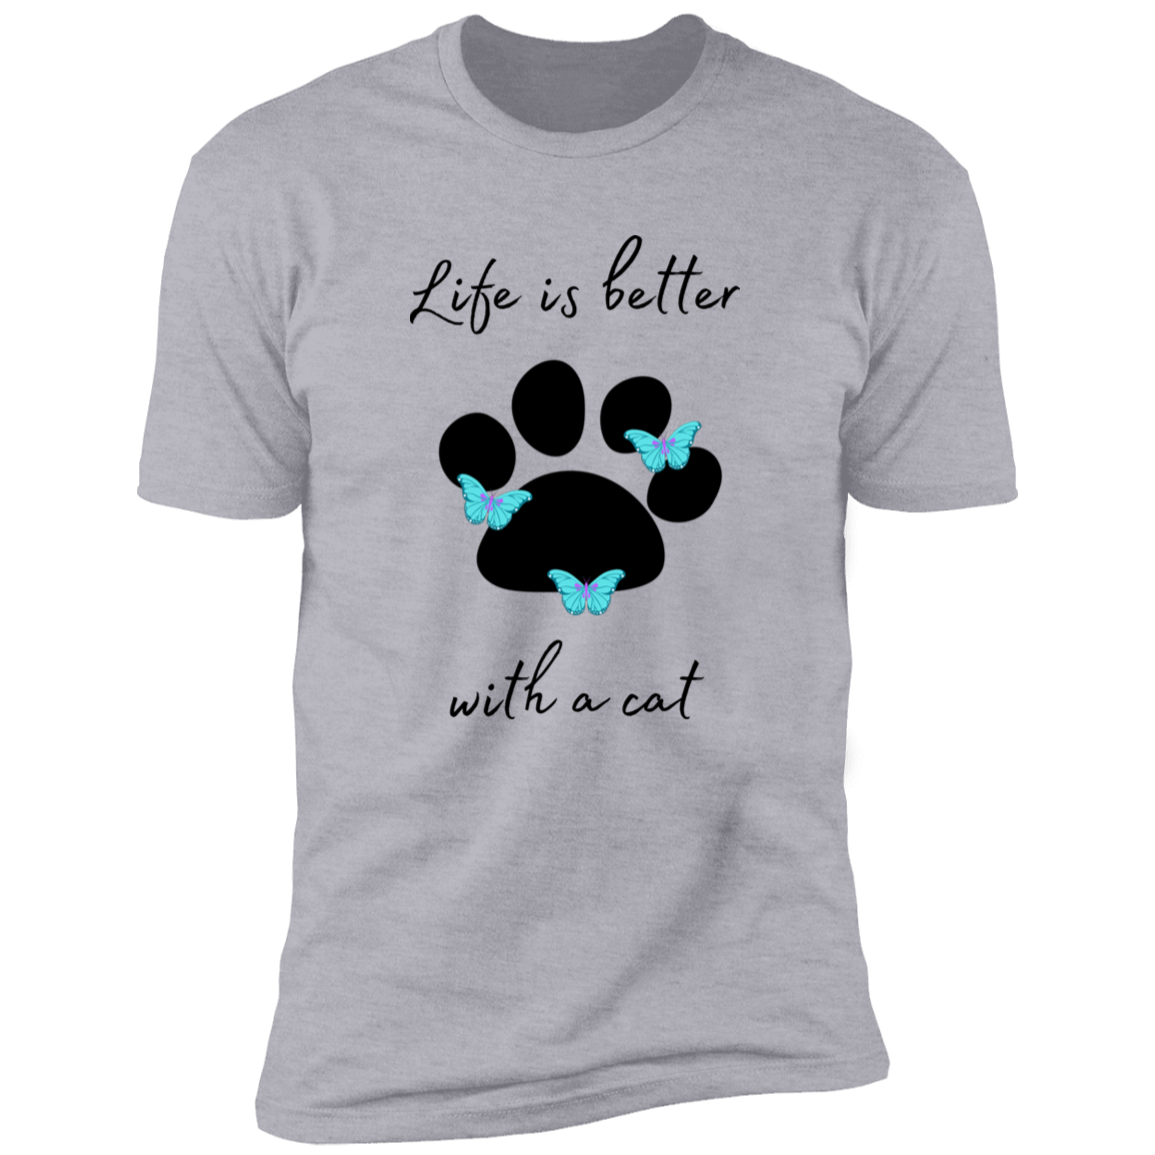 Life is Better with a Cat T-shirt, cat shirt for humans, Cat T-shirt in light heather gray